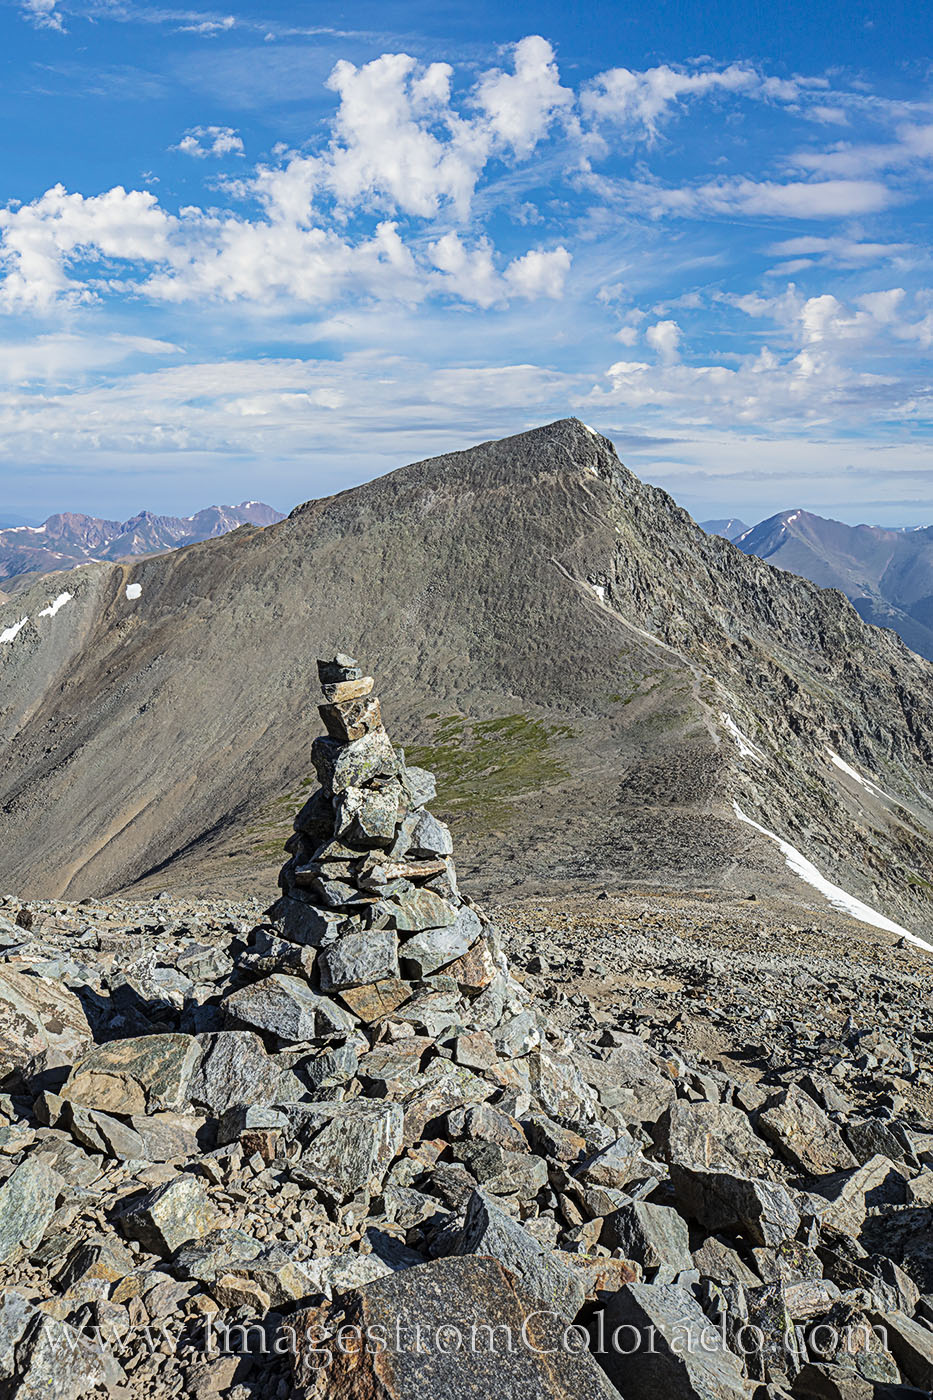 The trail down from Grays Peak to the saddle between Grays and Torreys and back up again is long and steep, but the views are...